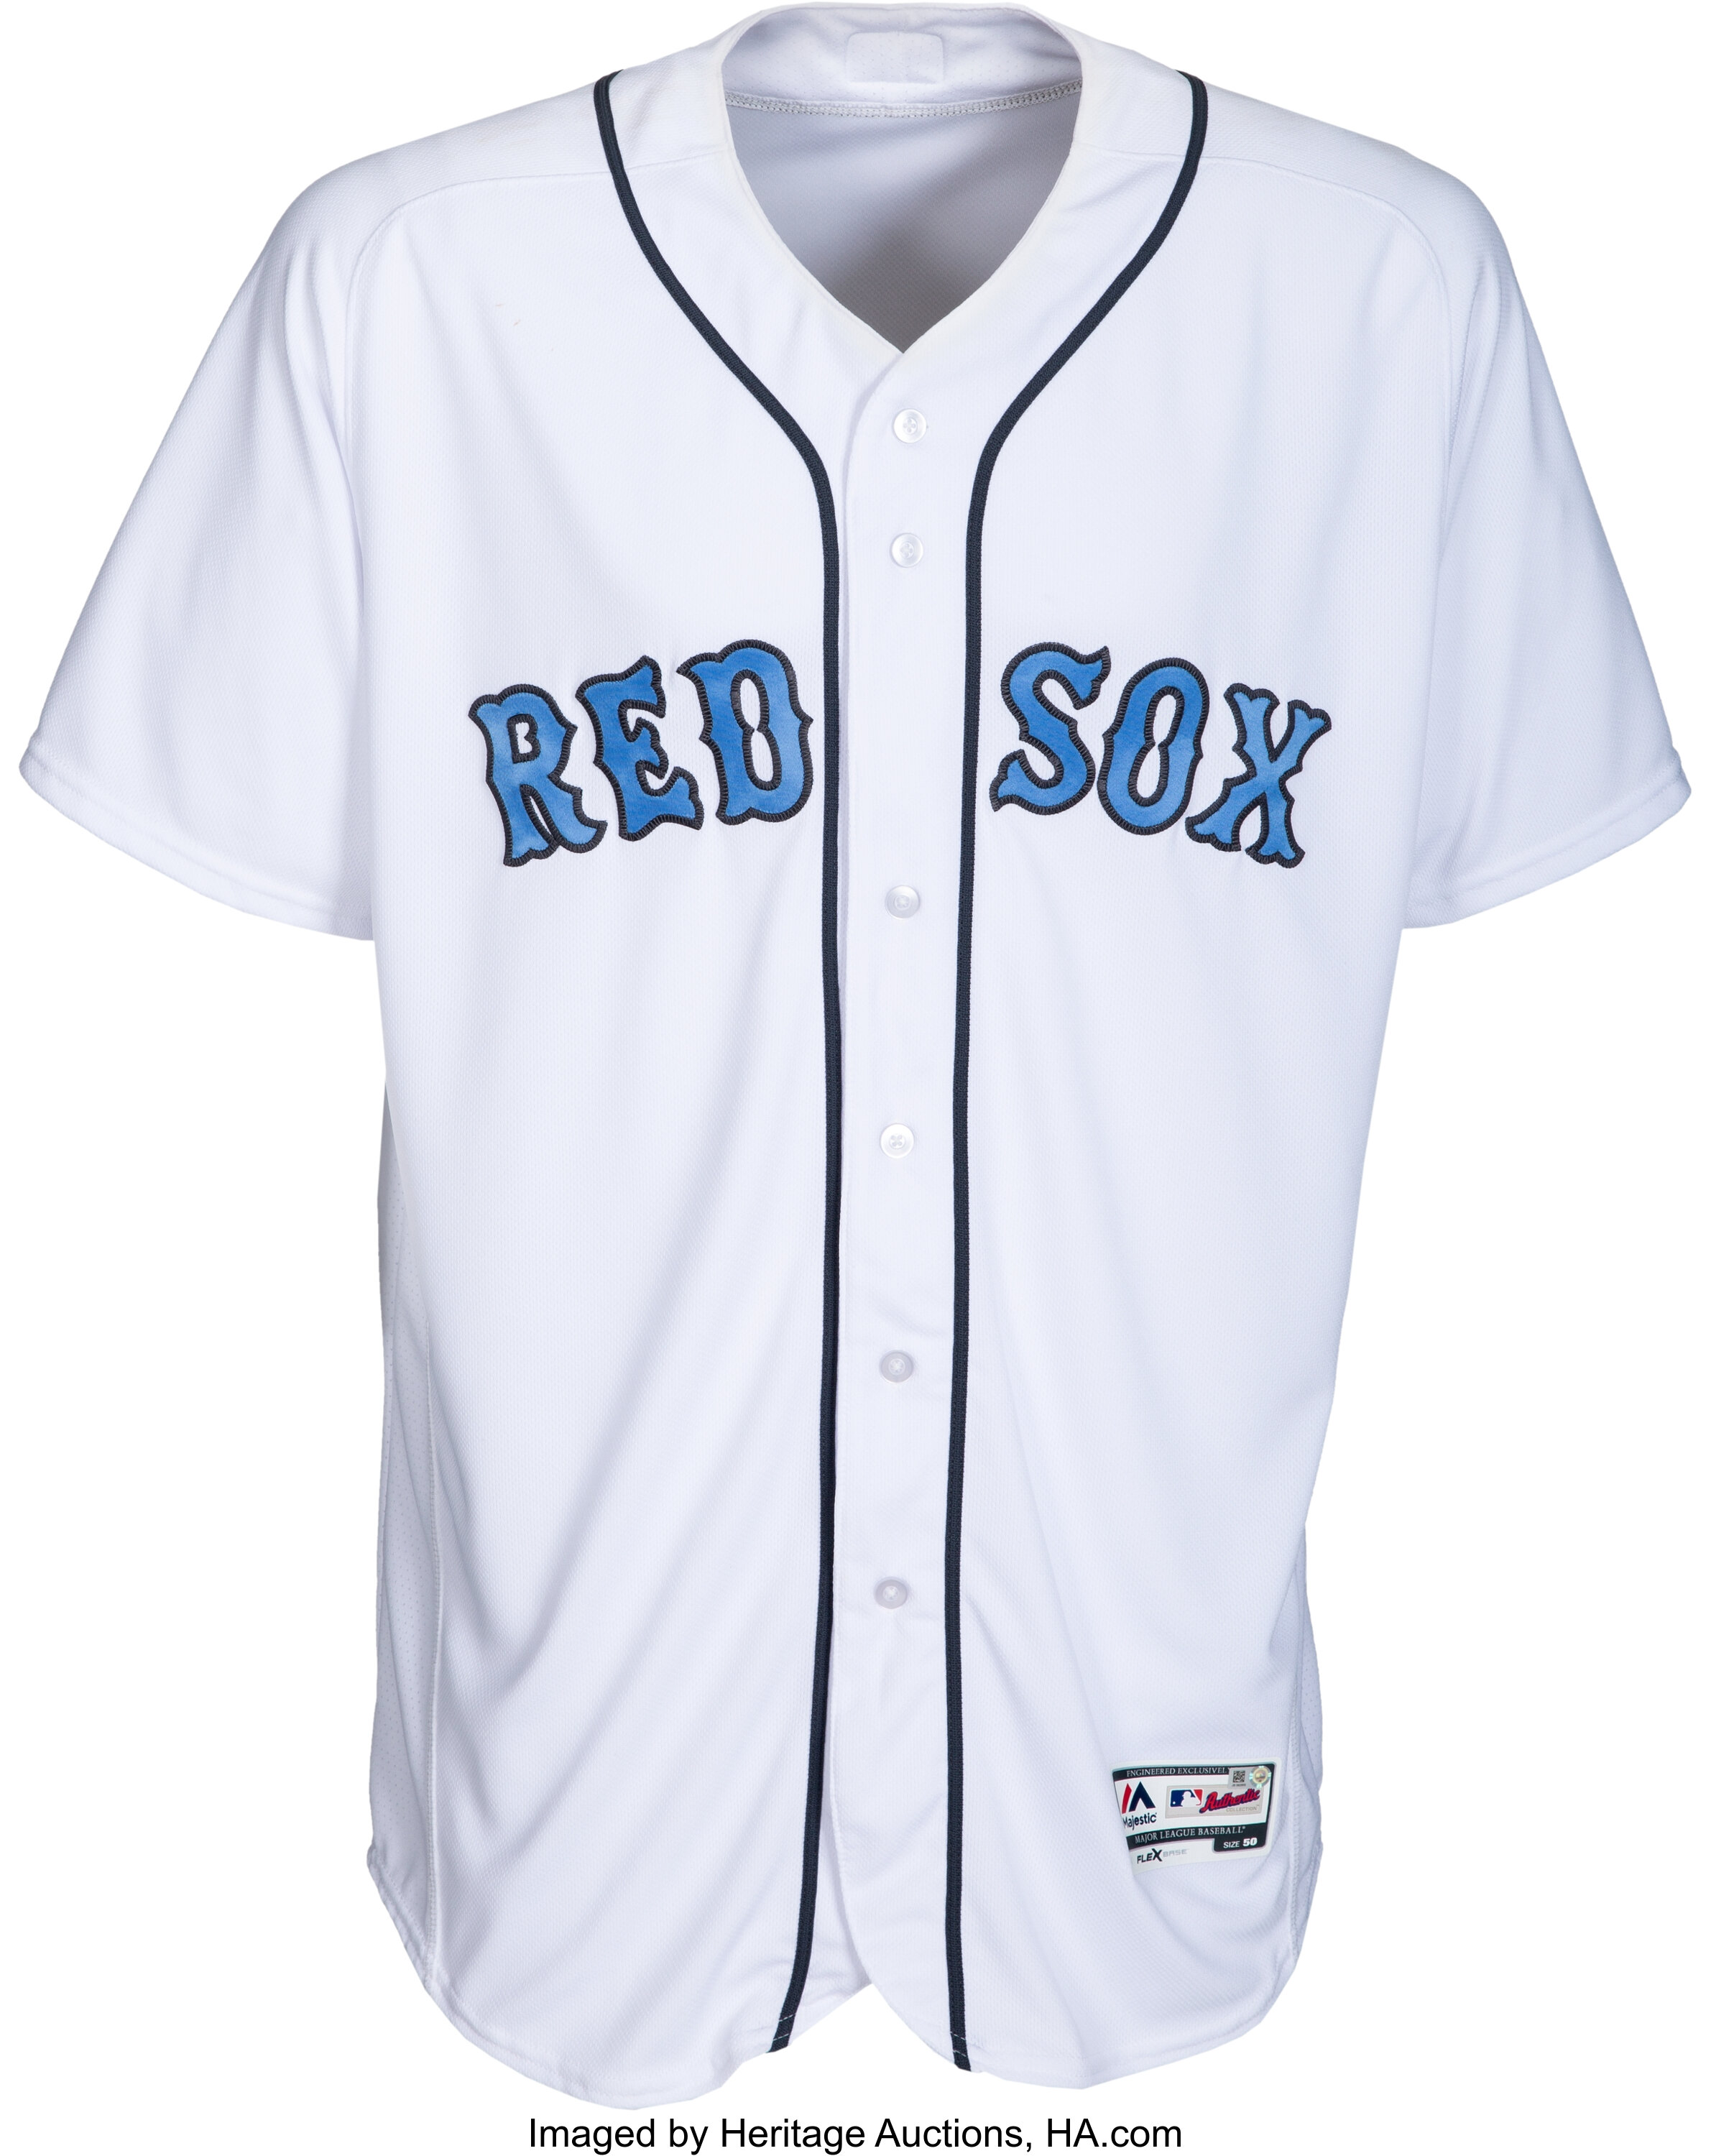 Boston Red Sox Father's Day Jerseys